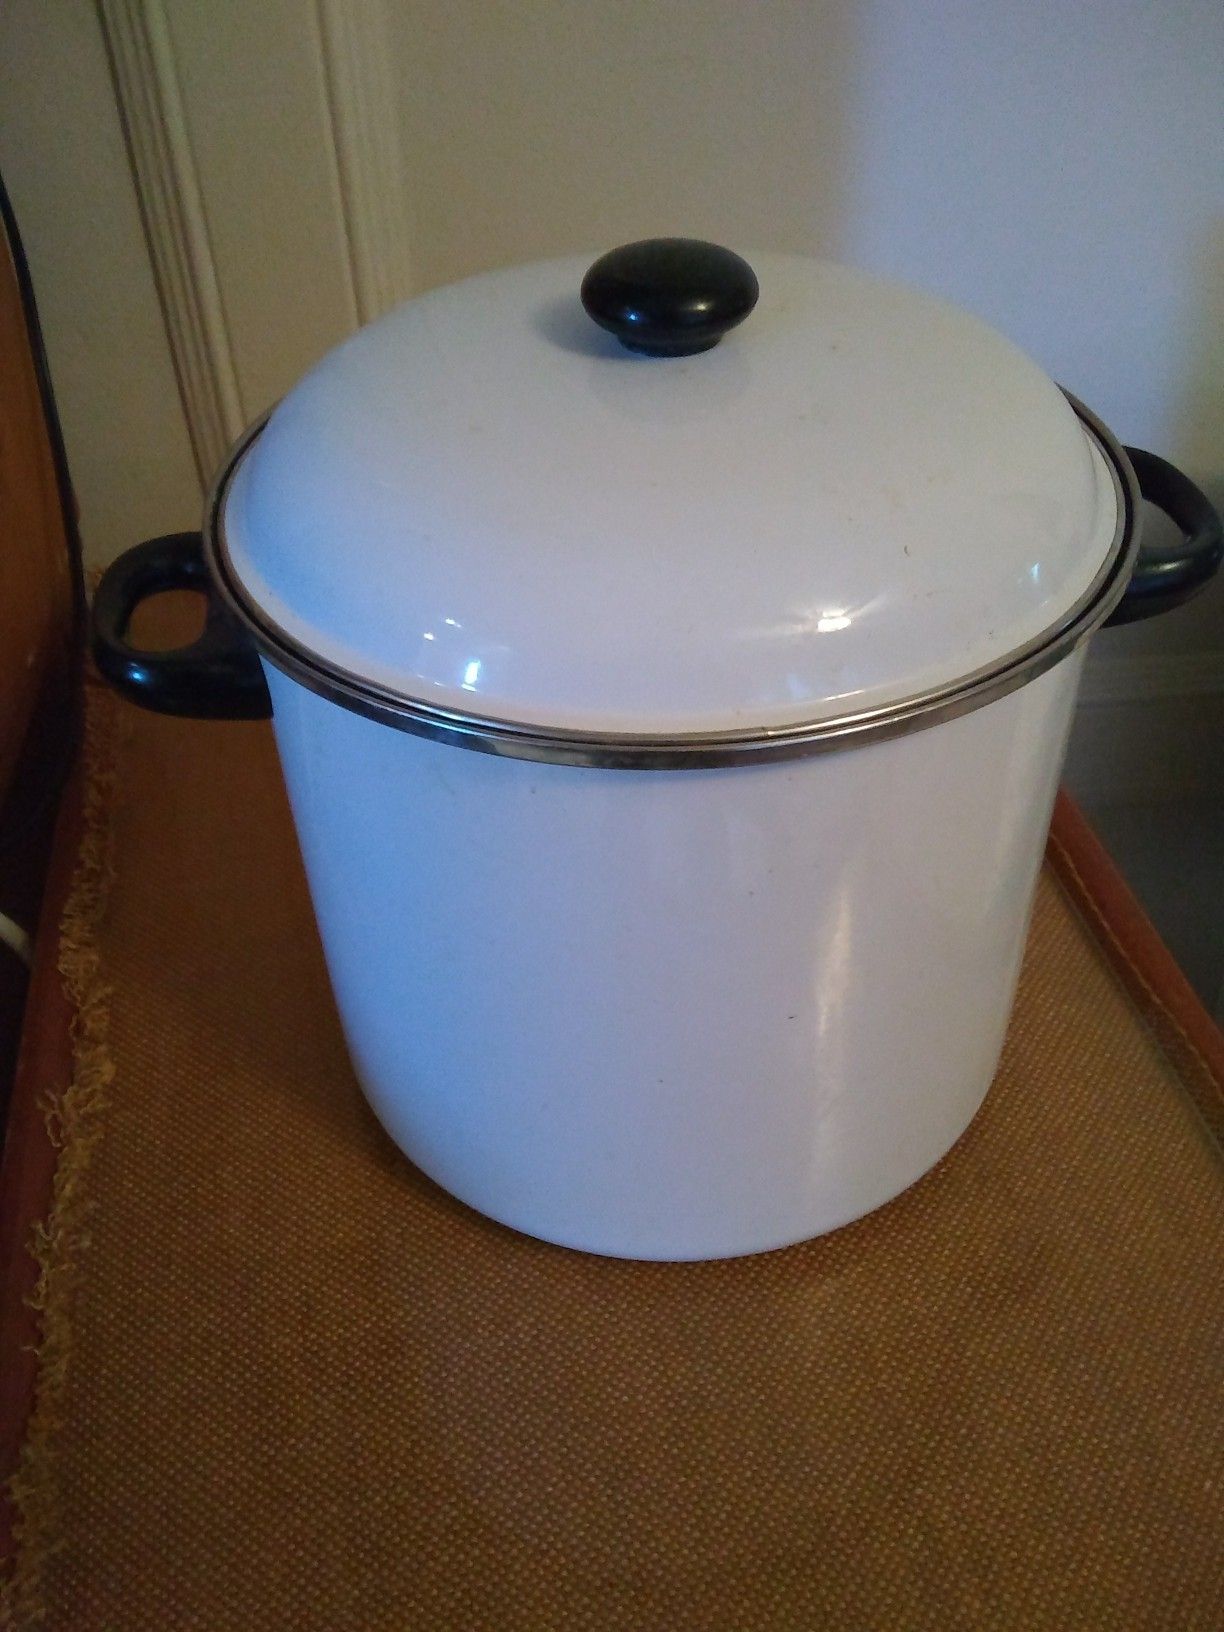 Stock pot and Food steamer both porcelain, see all pictures pickup Western/Devon ave Chicago